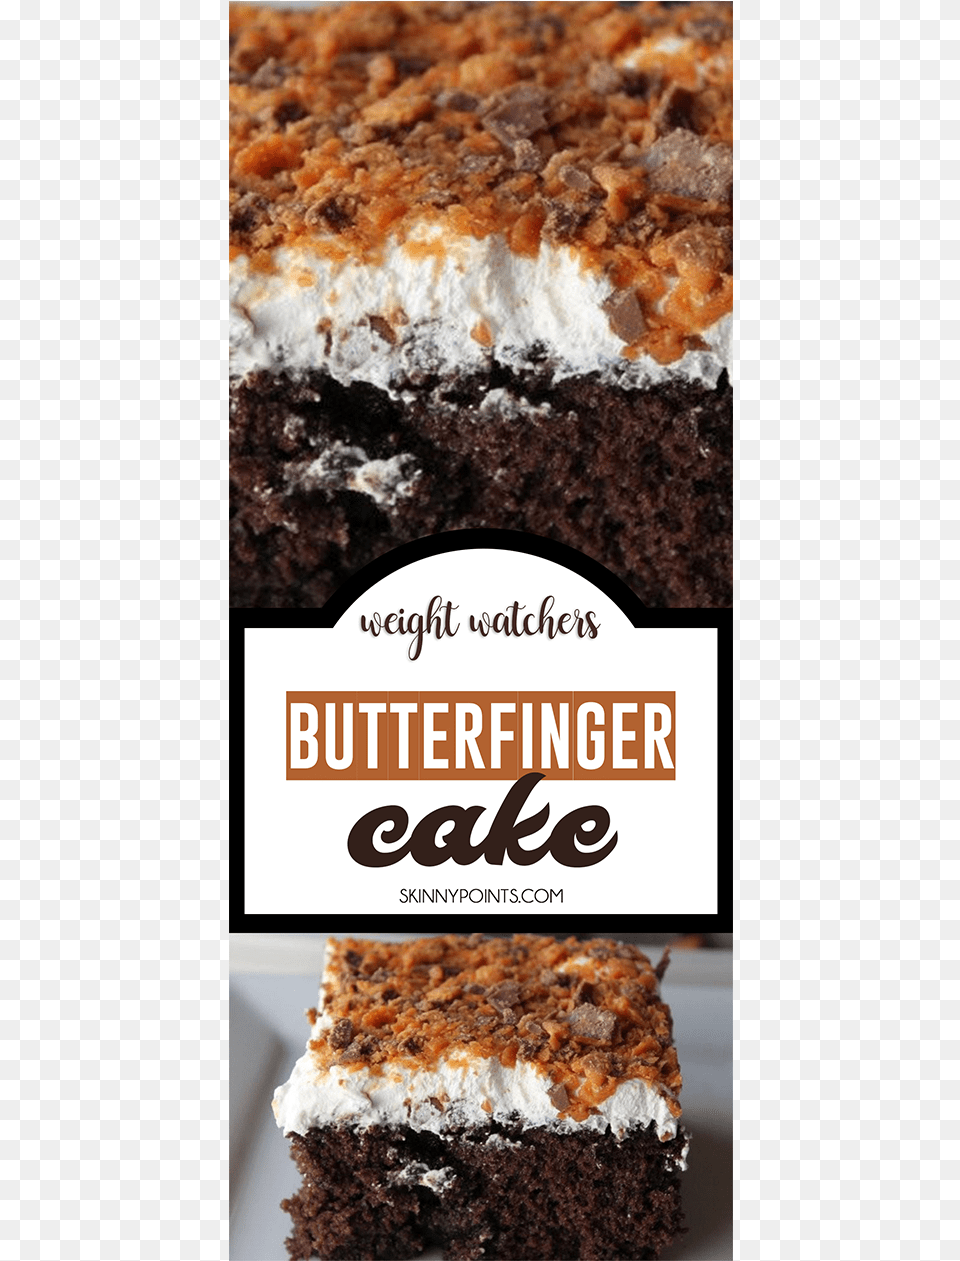 Butterfinger Cake Come With 6 Weight Watchers Smart Altendorf, Brownie, Chocolate, Cookie, Dessert Png